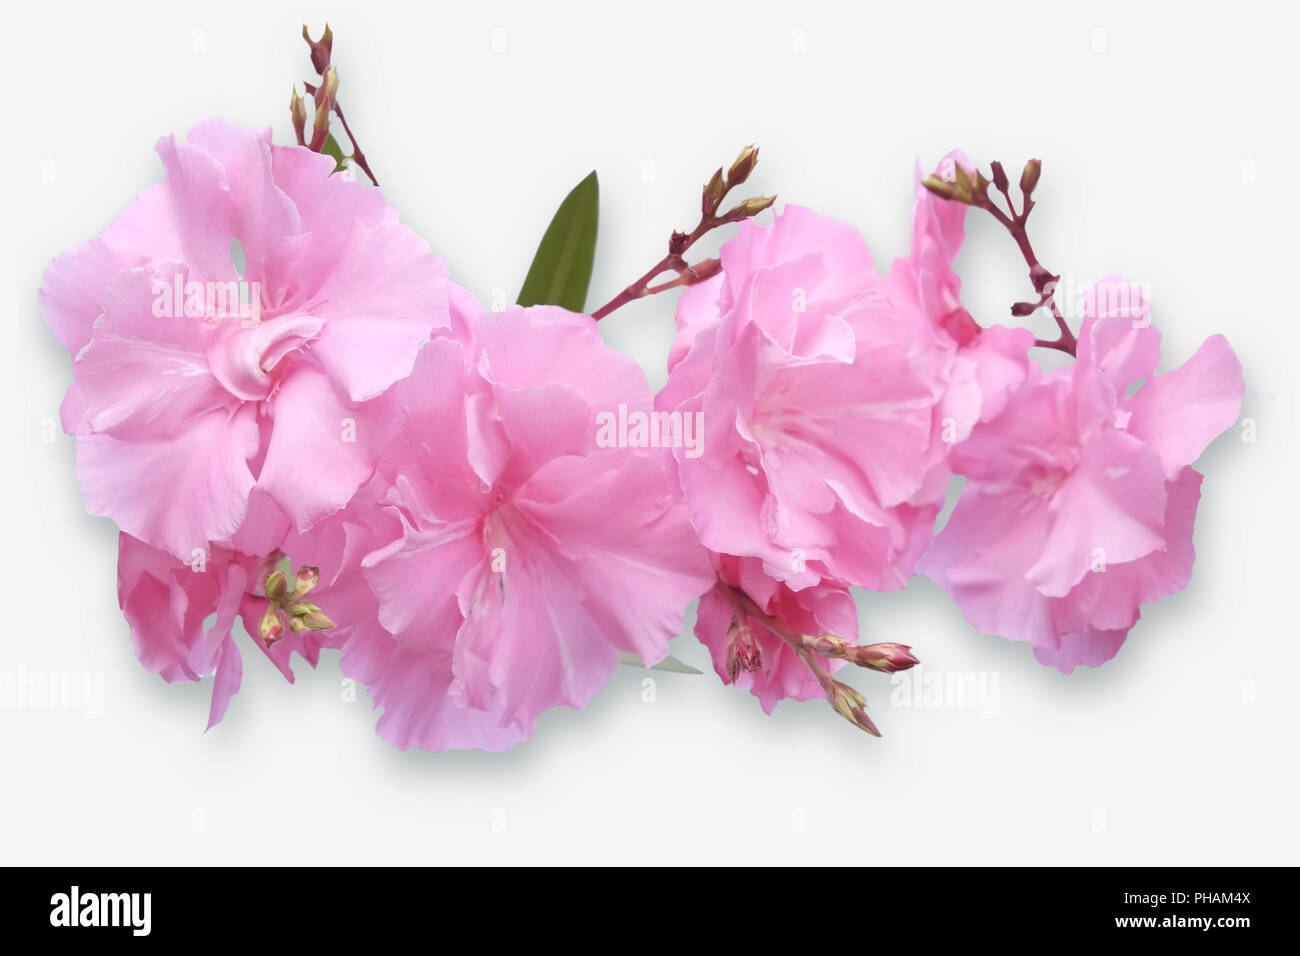 Oleander blossoms Stock Photo